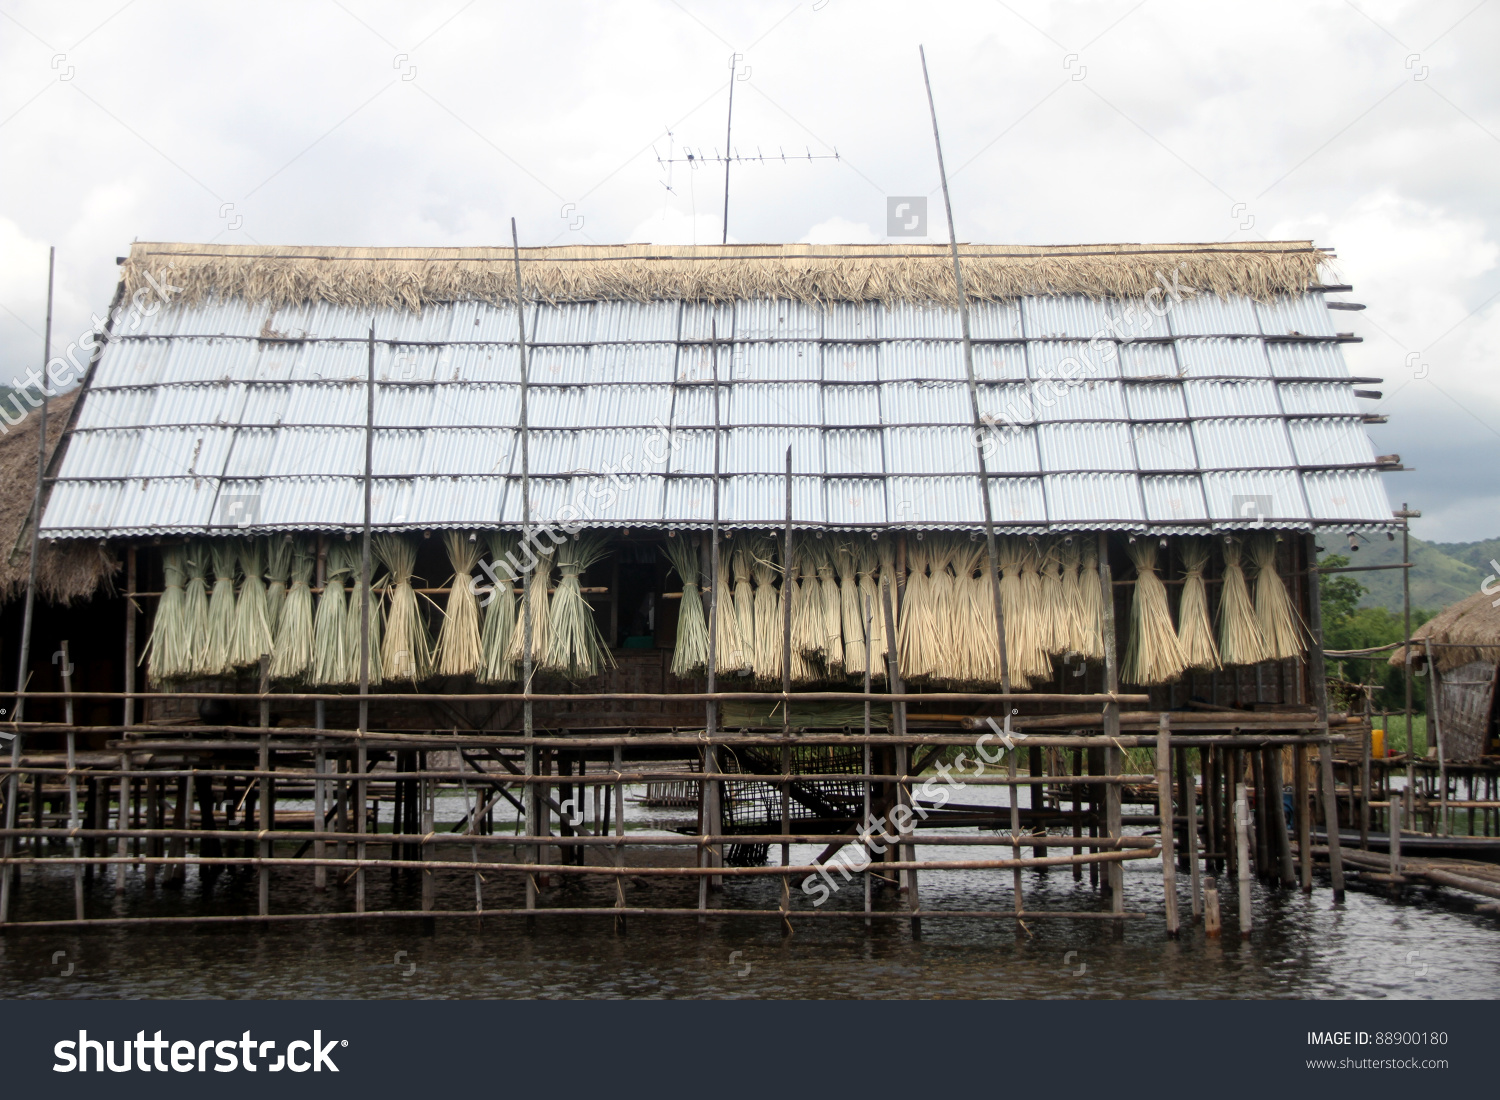 Rice Straw Under Roof House On Stock Photo 88900180.